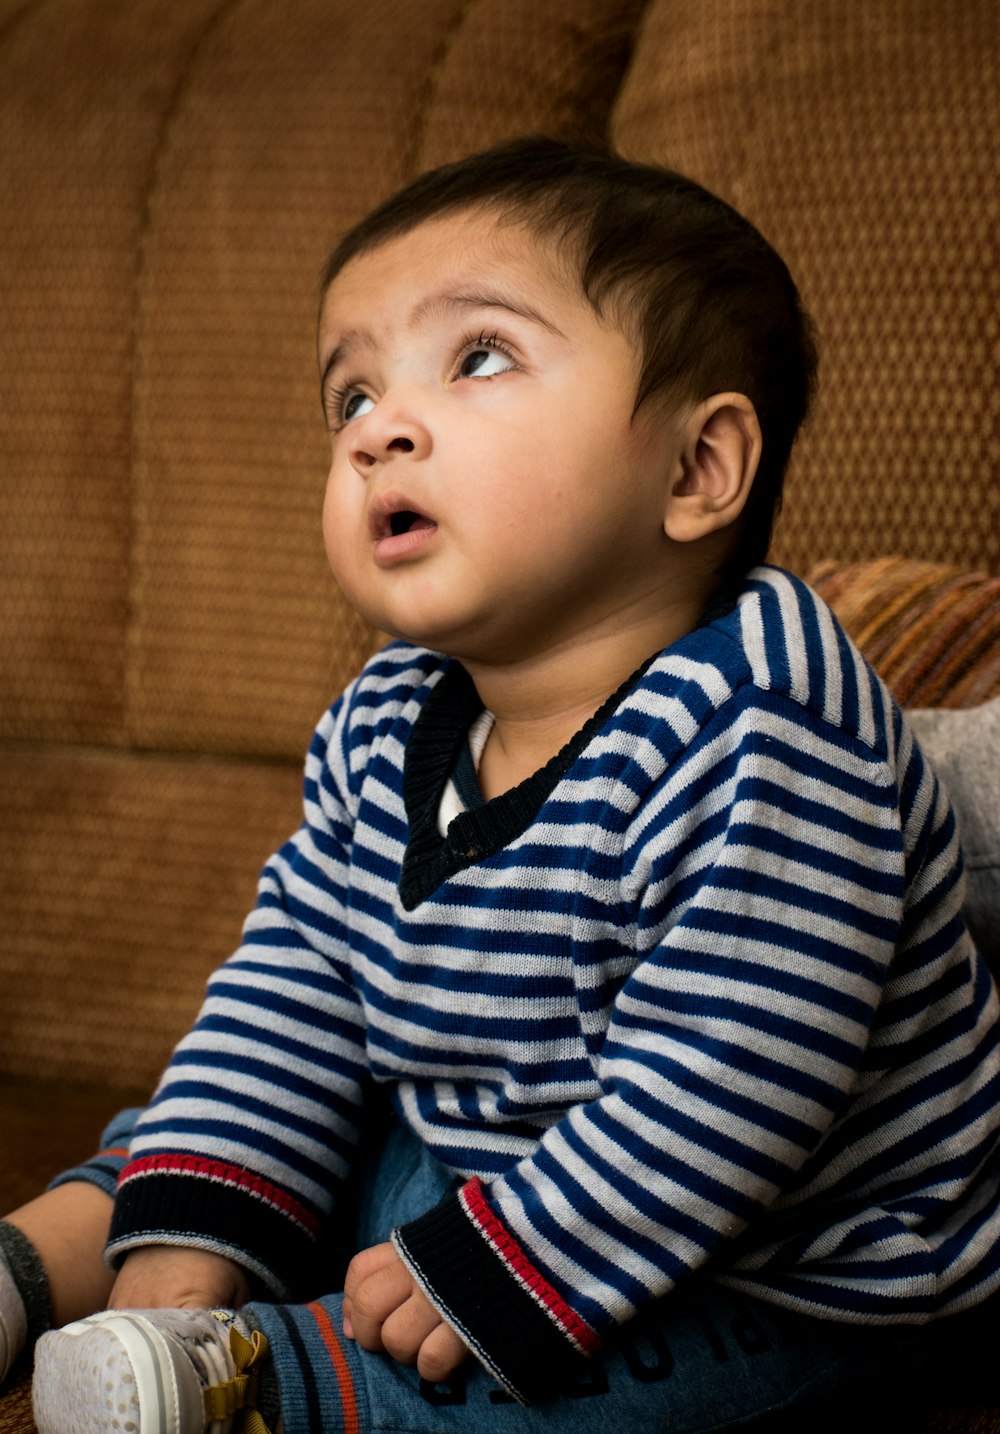 boy in blue and white striped long sleeve shirt sitting on brown sofa